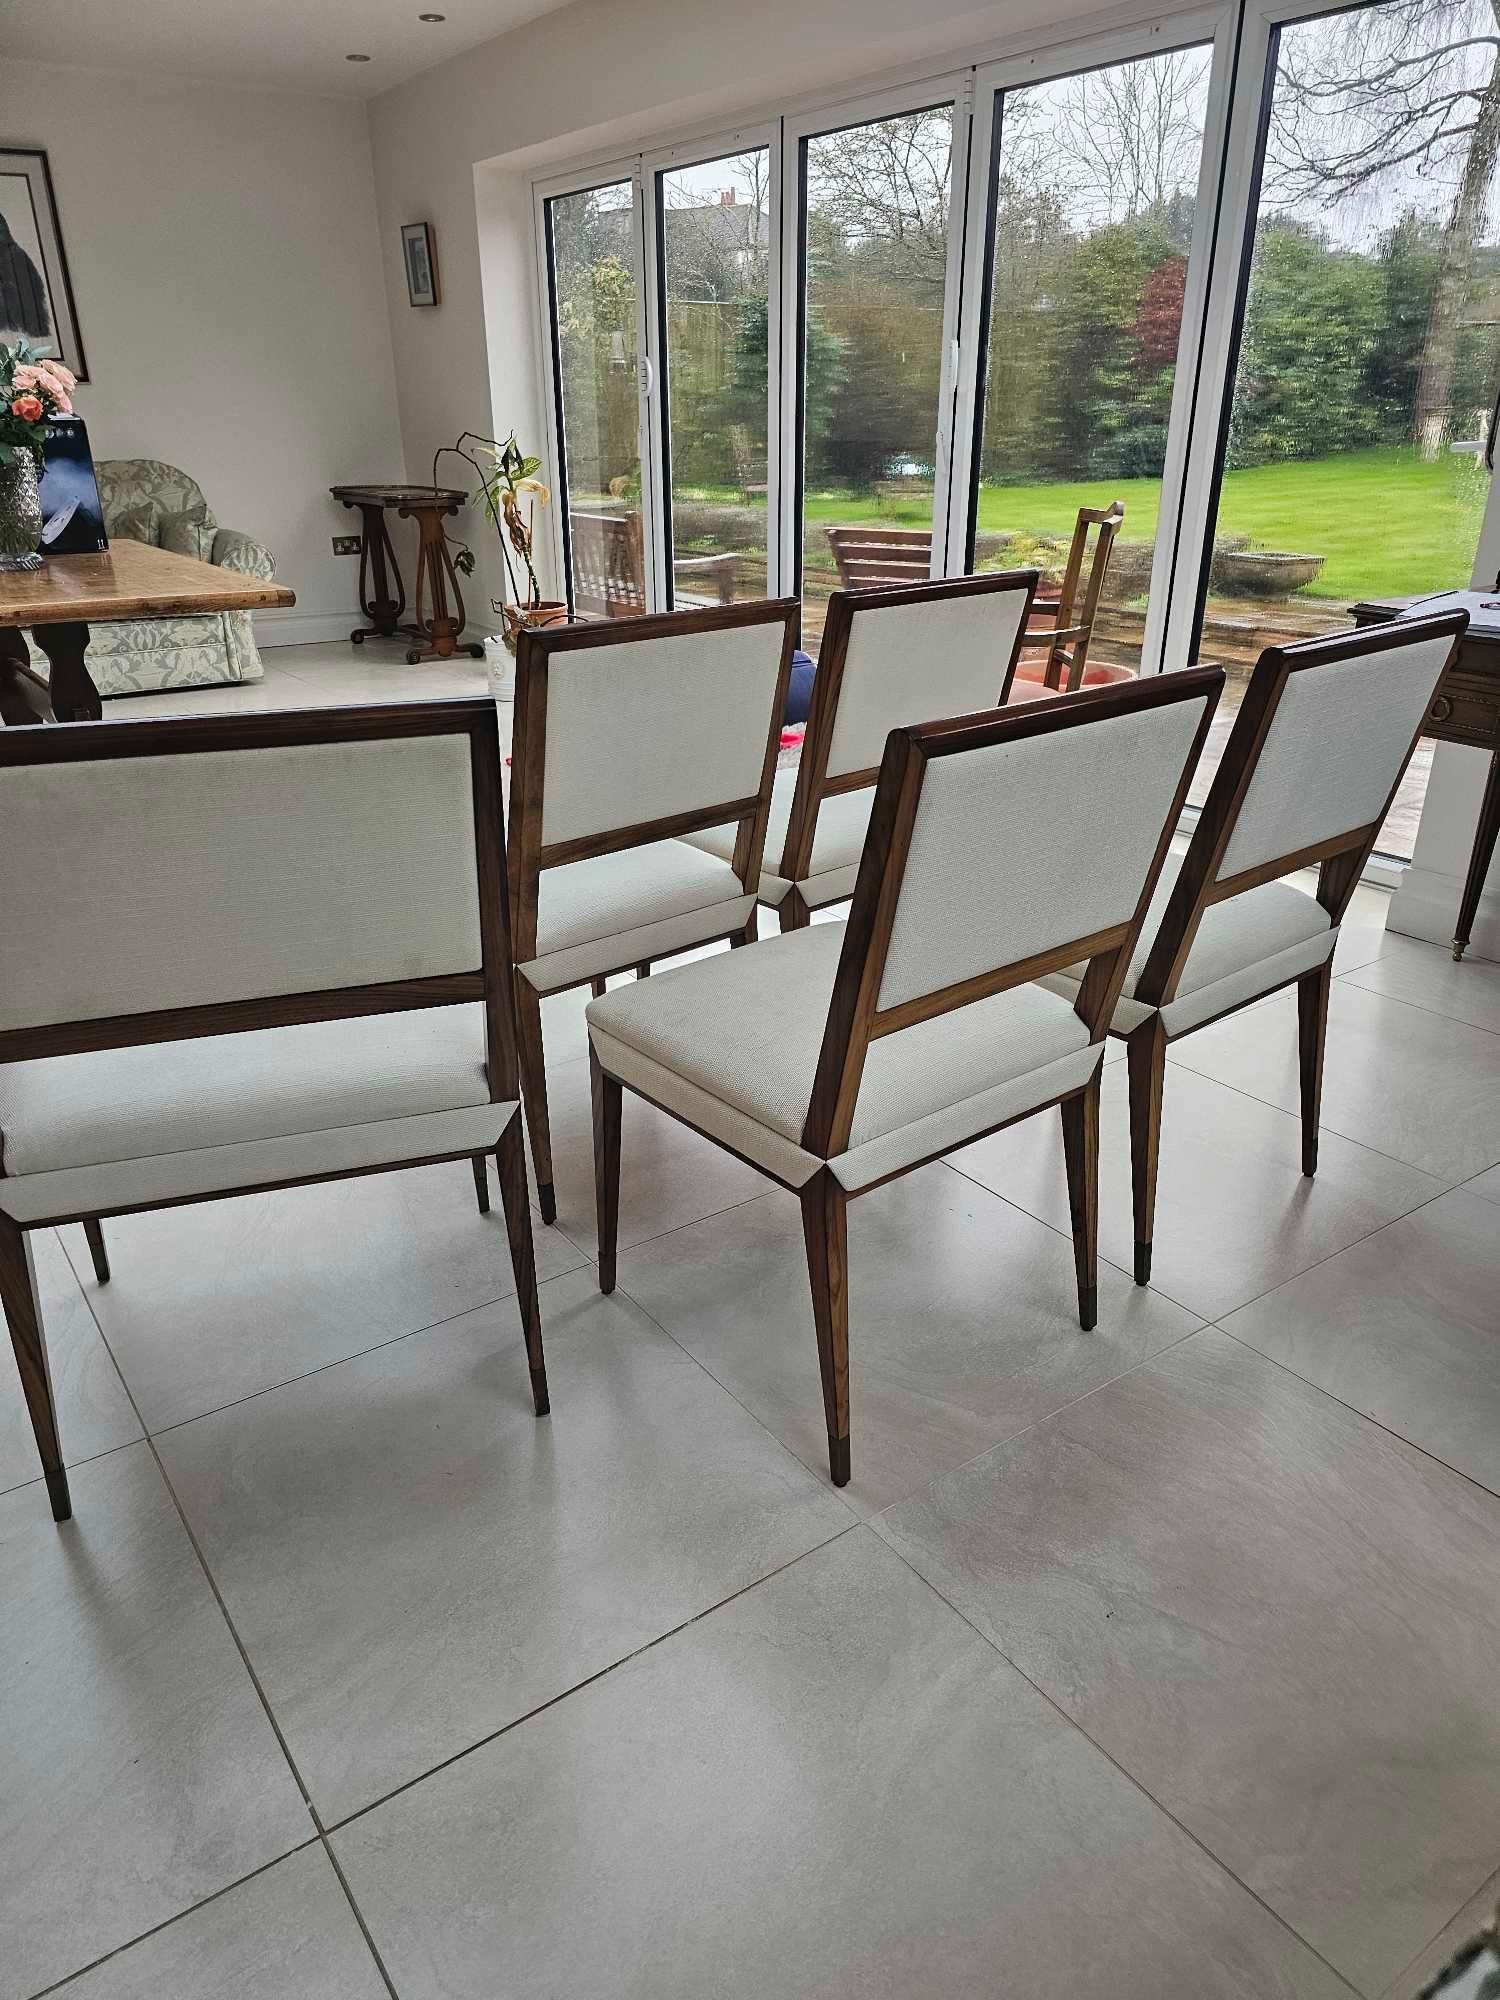 Tracey Boyd Reform Side Chairs Upholstered In Madison Dove X 4 Complete With A Armchair To Match - Image 5 of 5